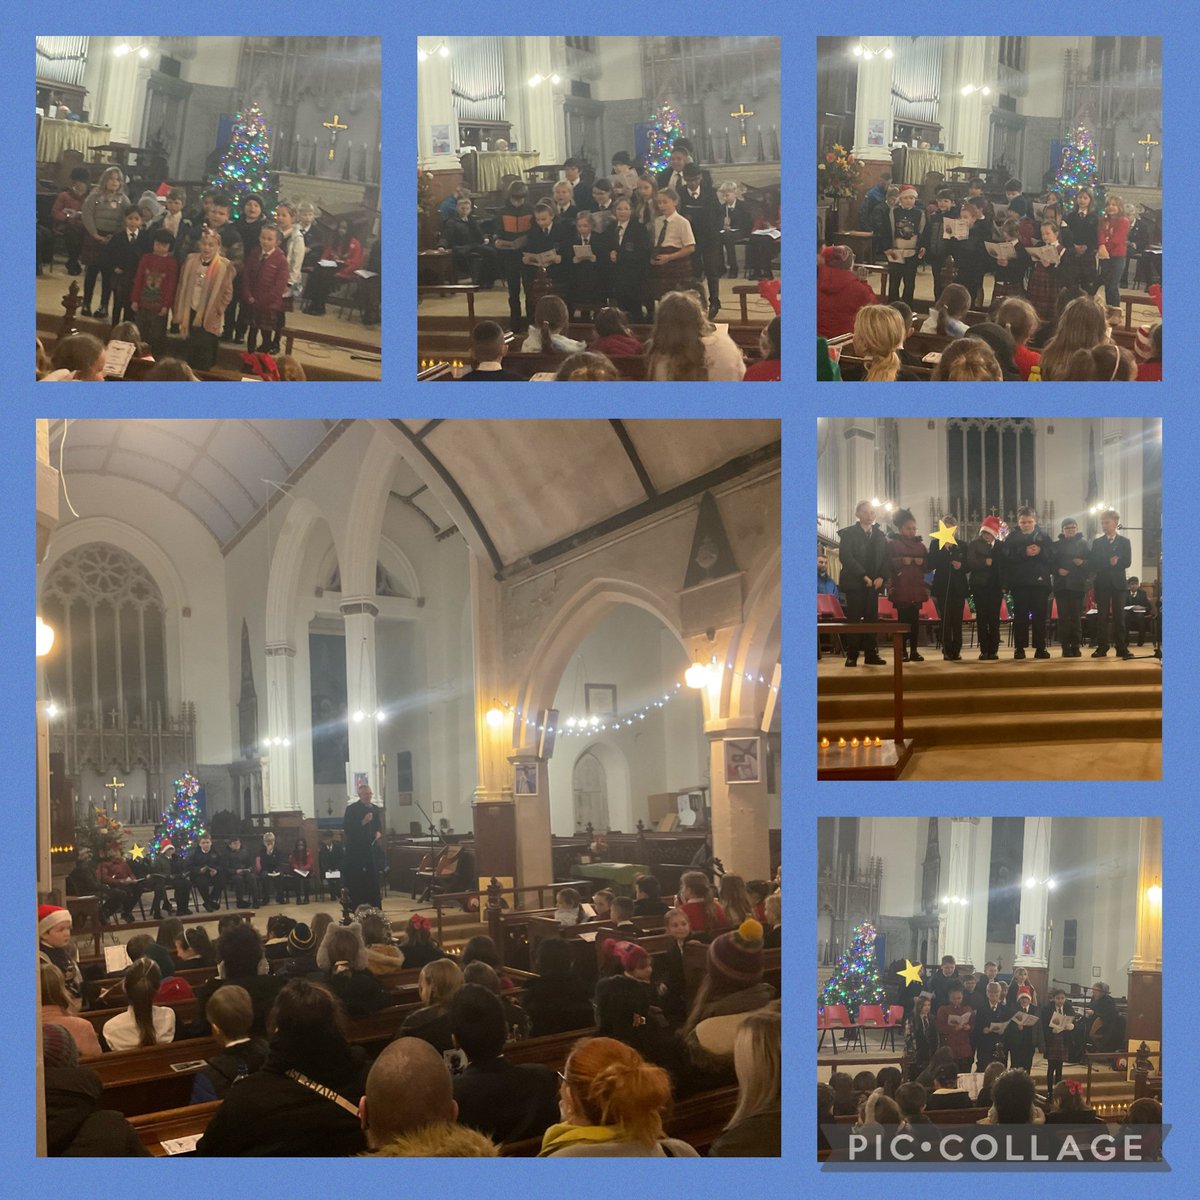 We held our KS2 and Year 2 Carols by Candlelight service at St Thomas Church on Tuesday. It was a lovely evening bringing our community together and the children performed beautifully. Thank you to all that attended.